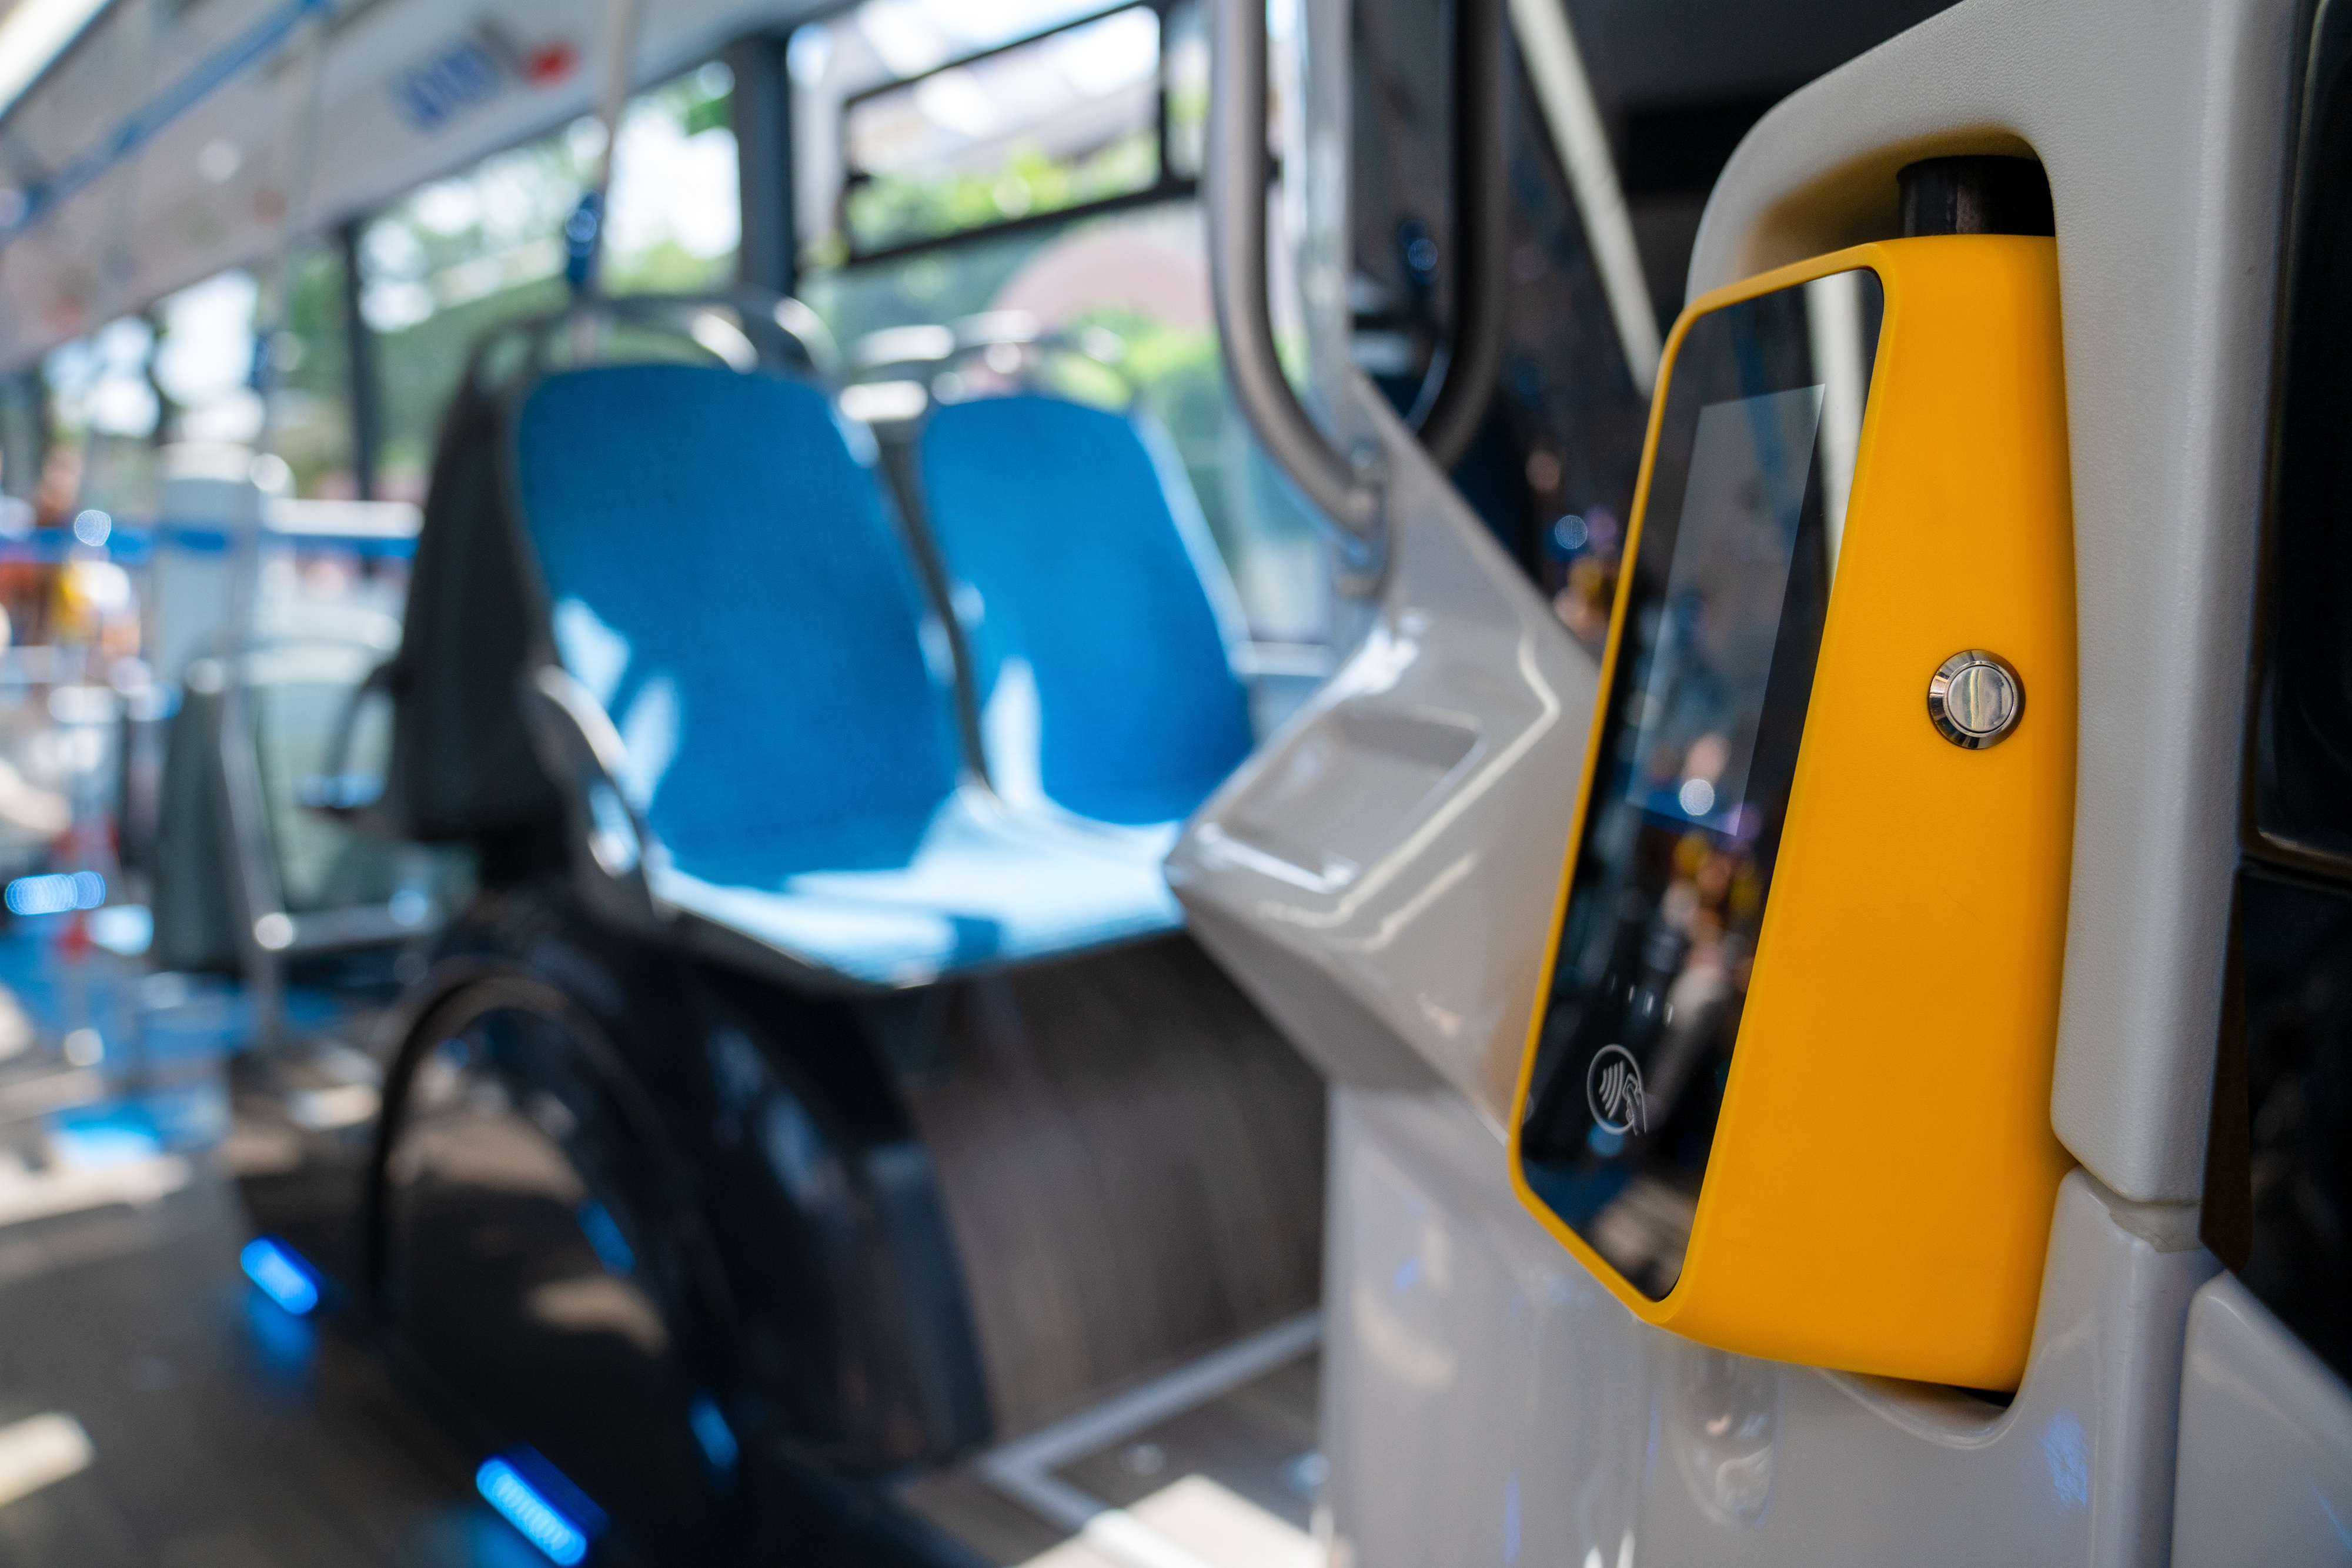 What to Look For in an Automated Fare Collection Solution